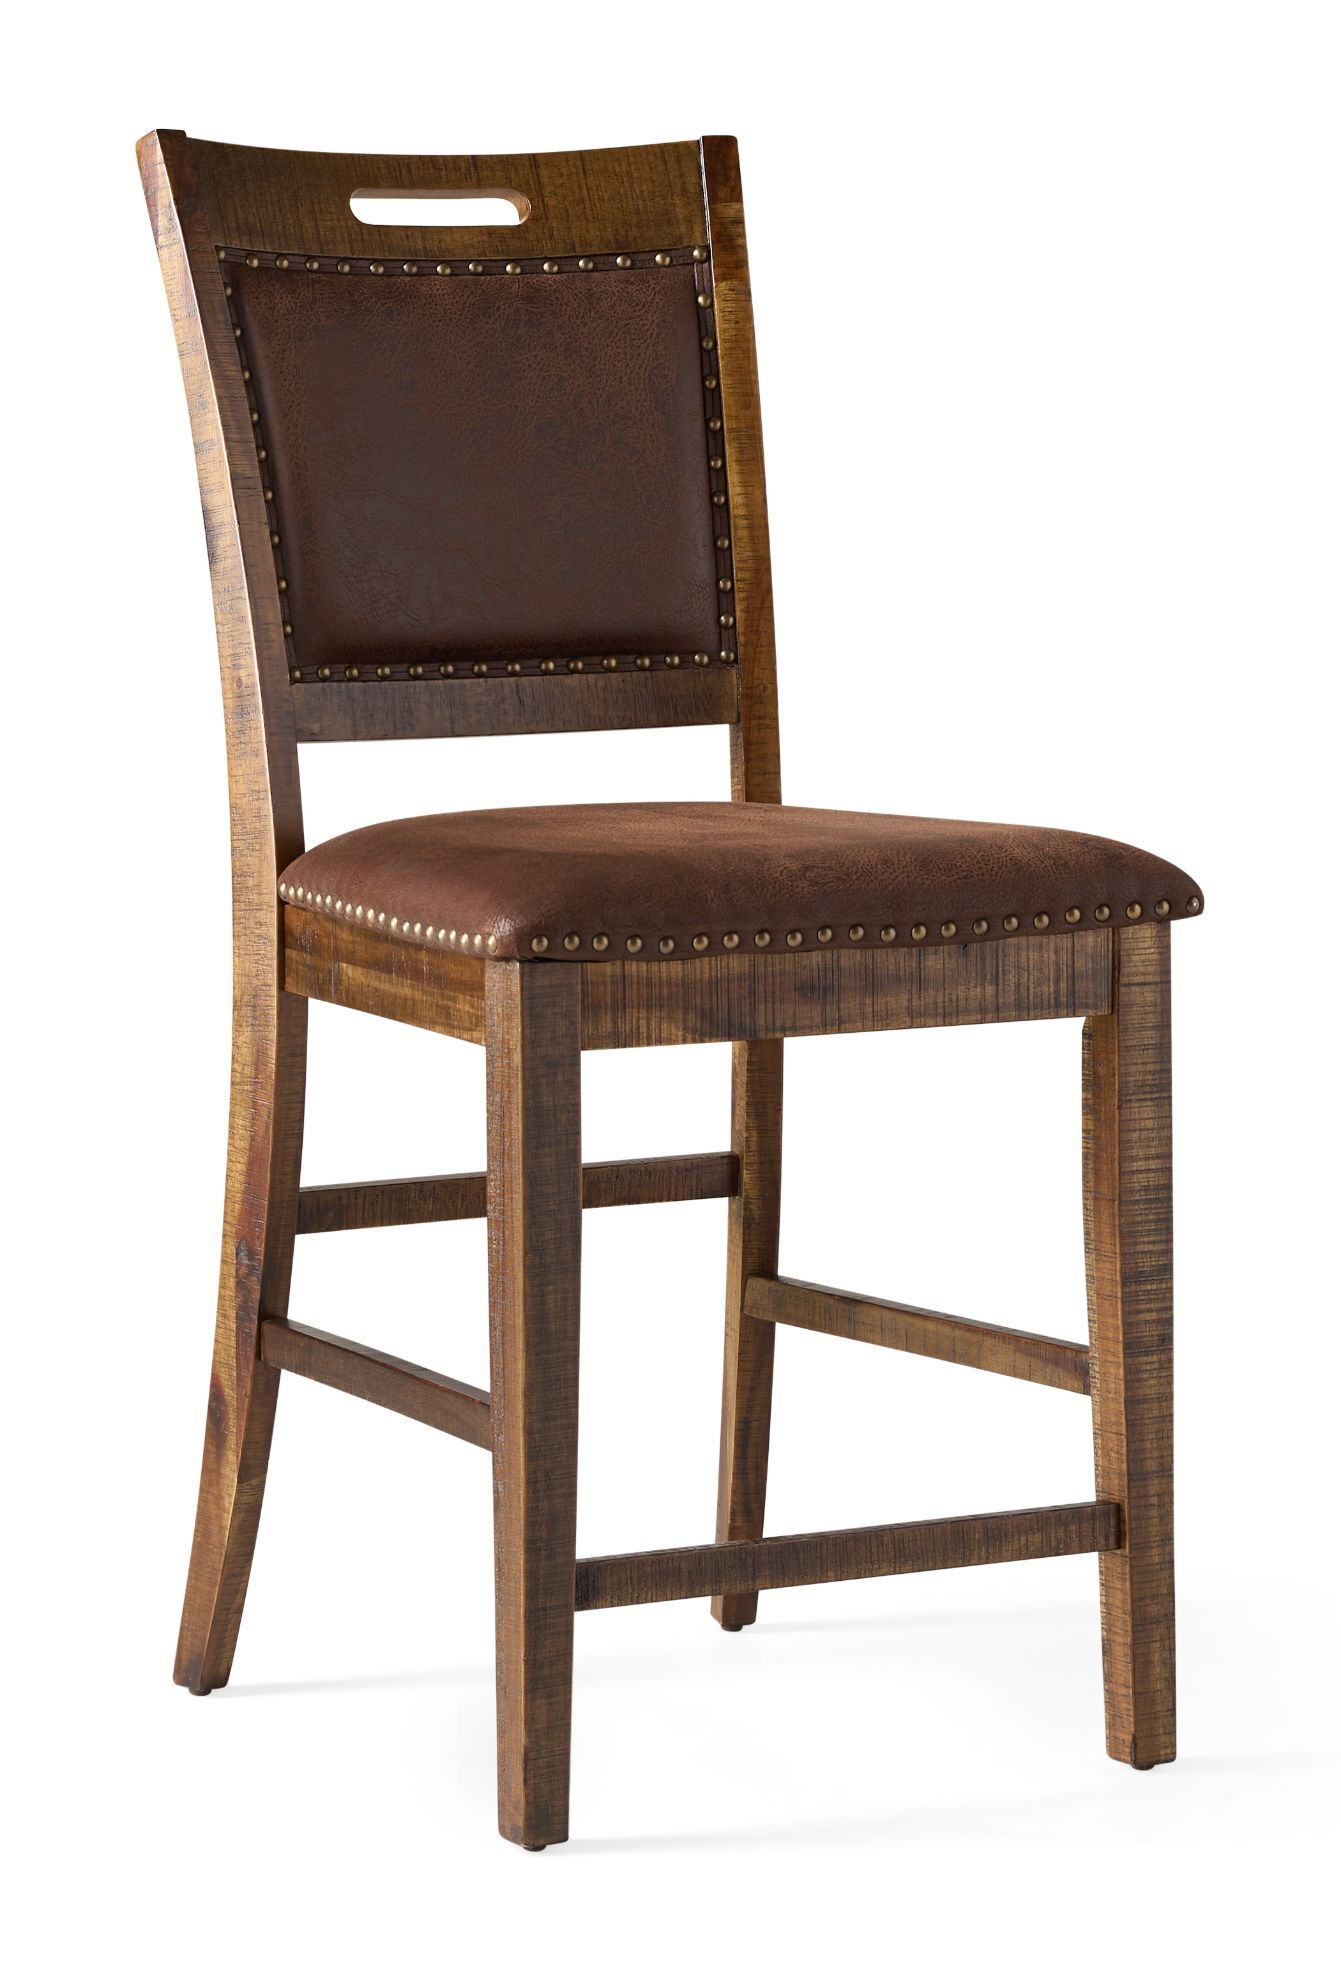 Cannon Valley Counter Stool